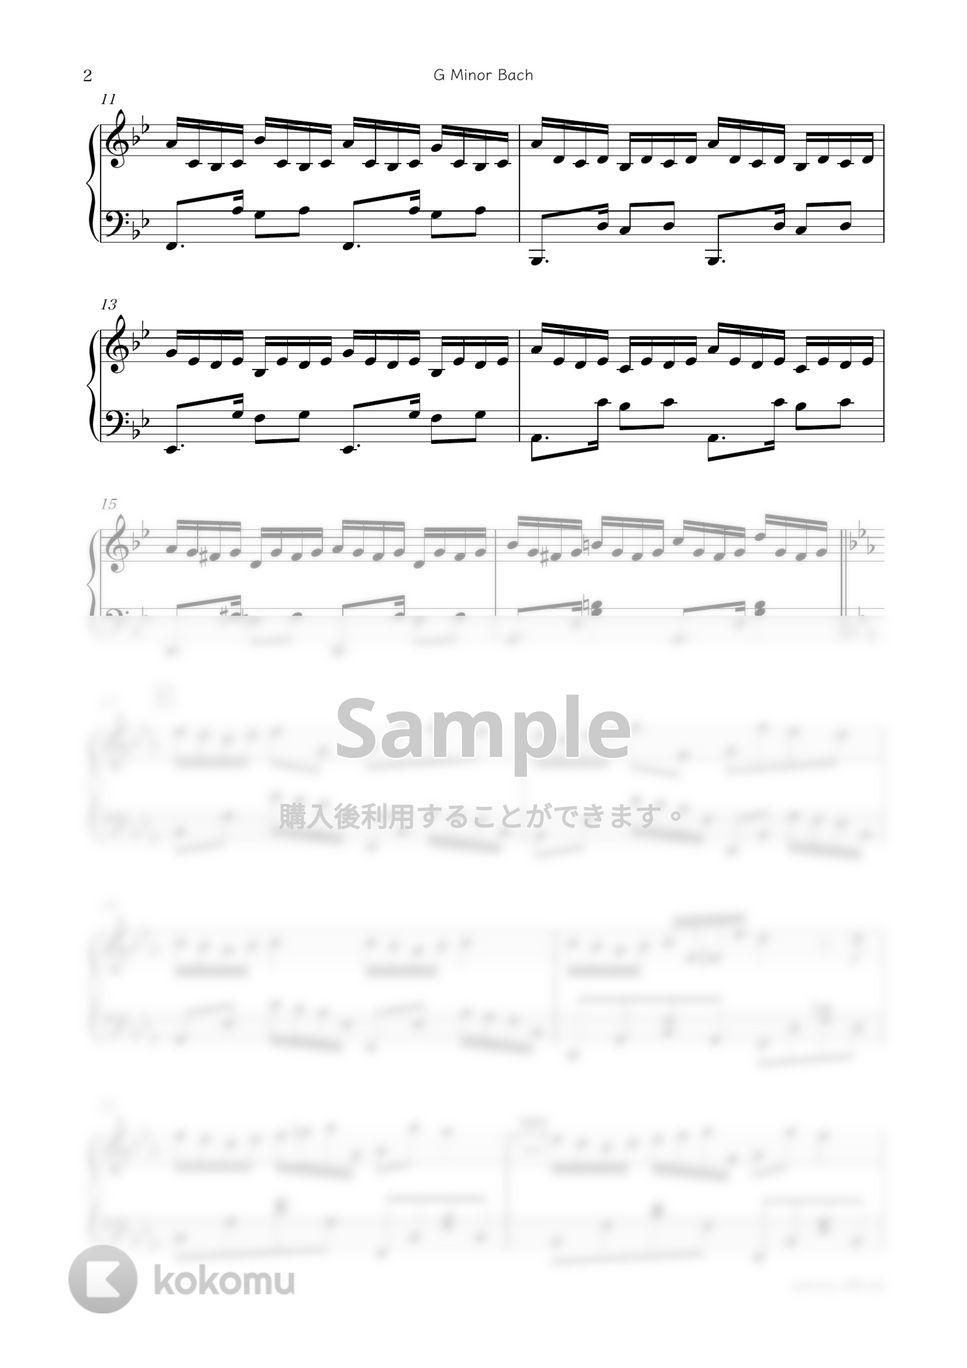 Piano Tiles2 - G Minor Bach (Luo Ni) by sammy